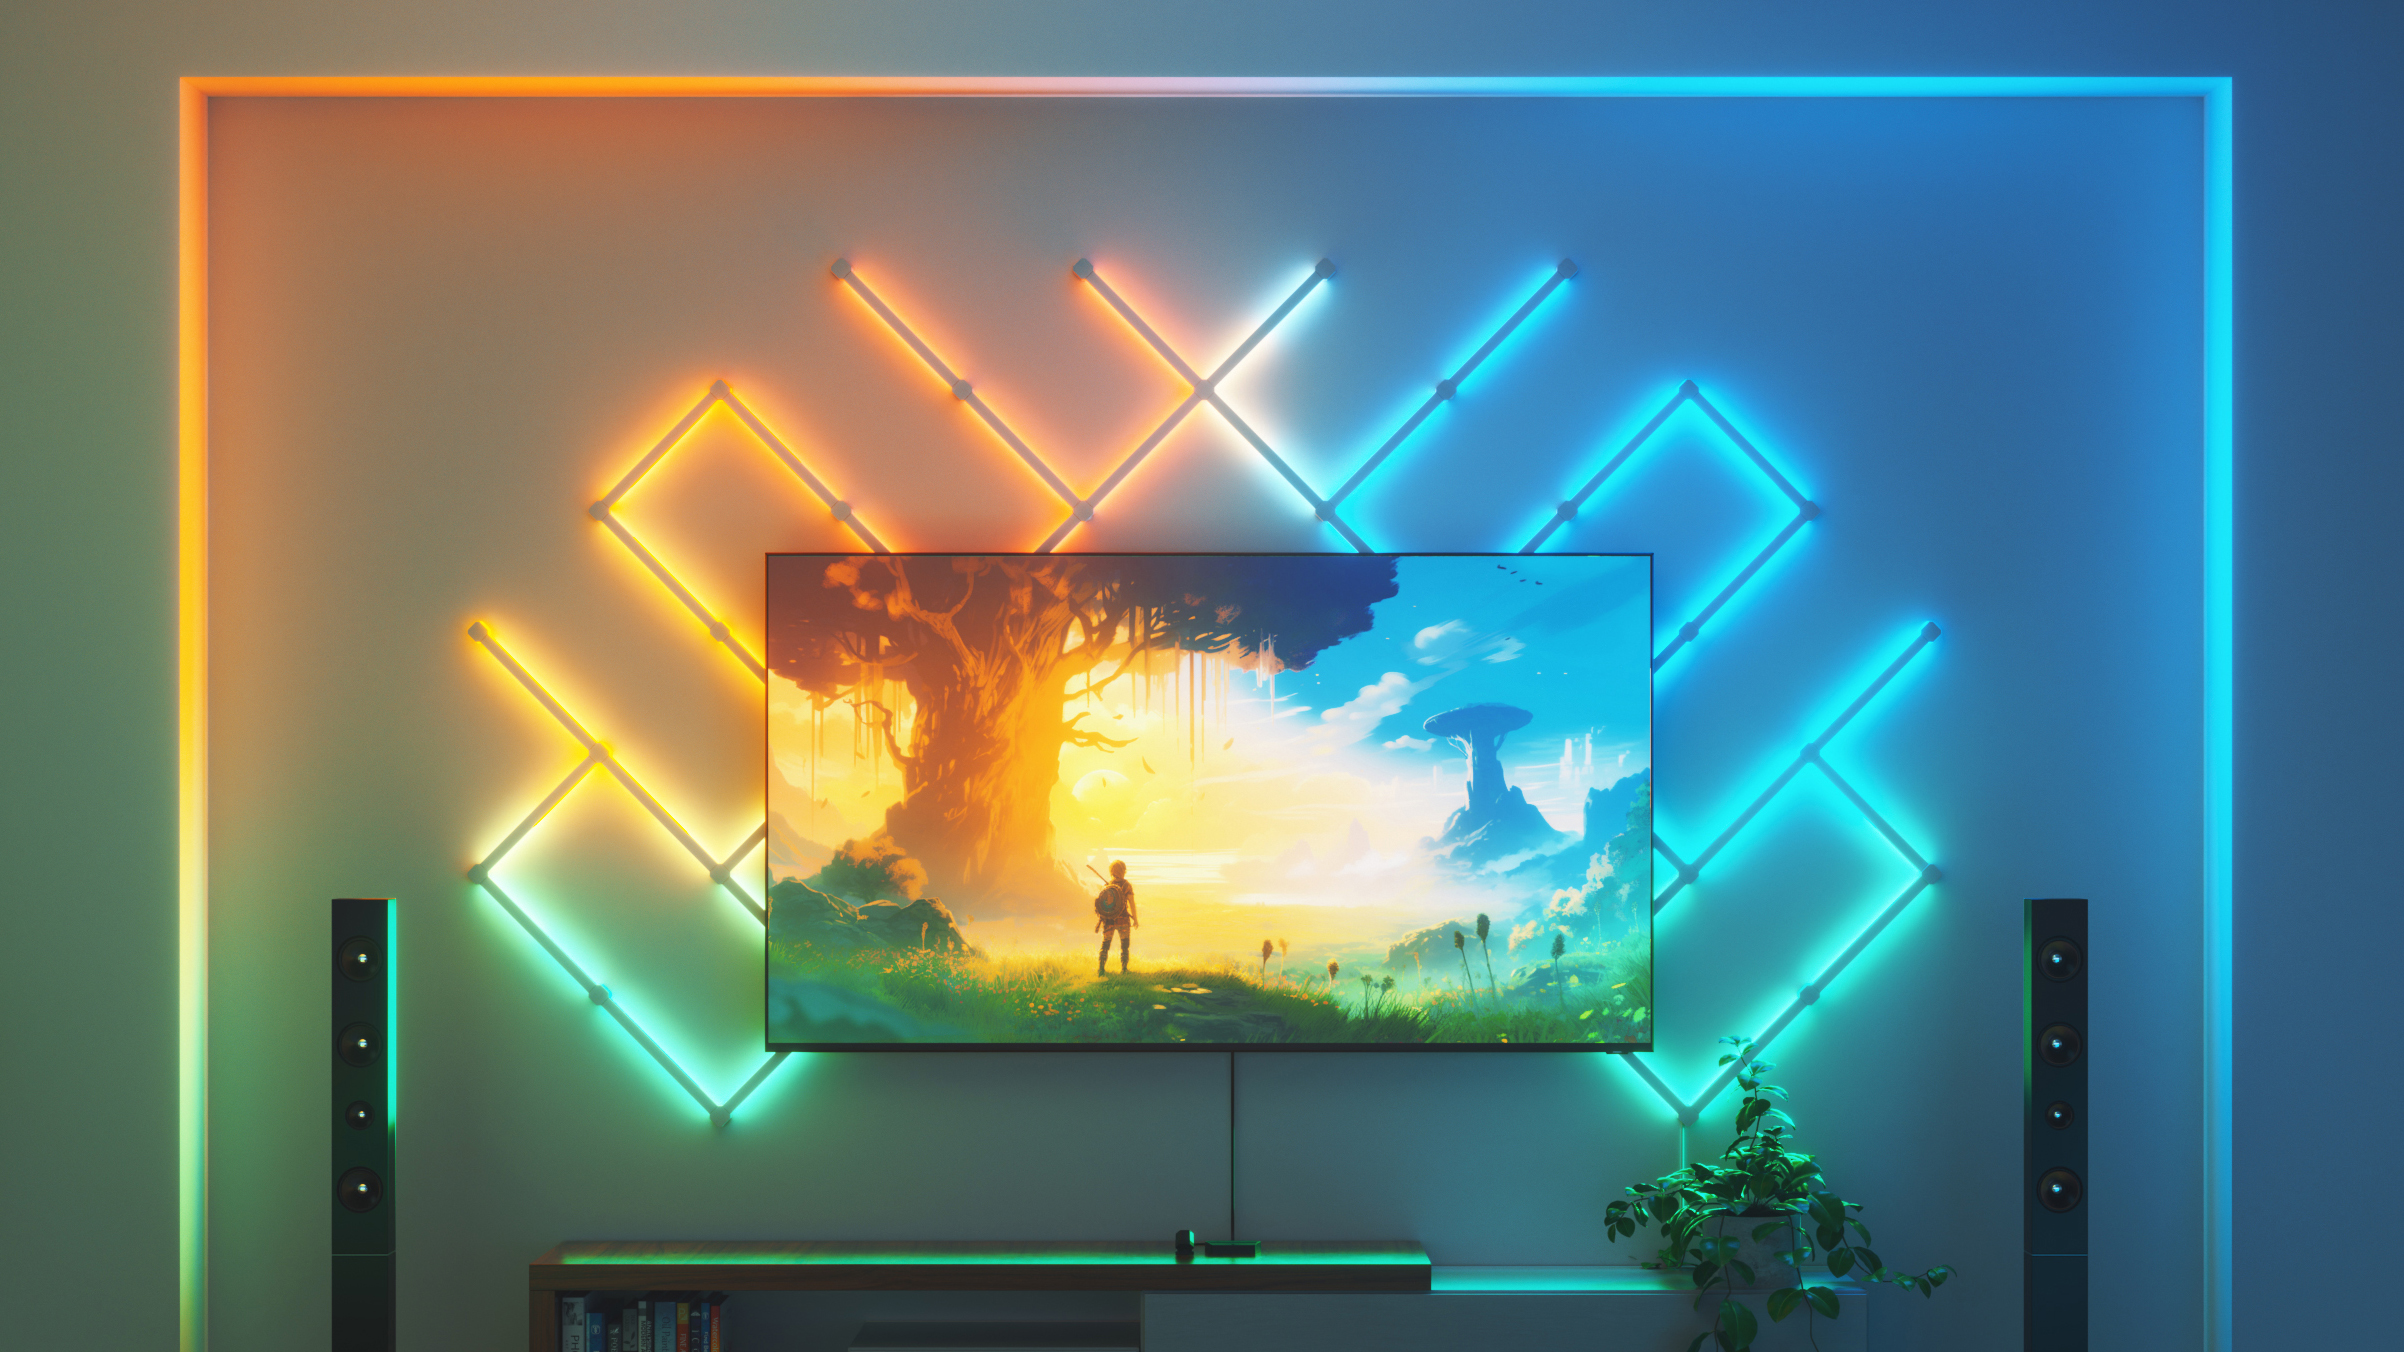 Philips confirms OLED+908 Ambilight TV launch details